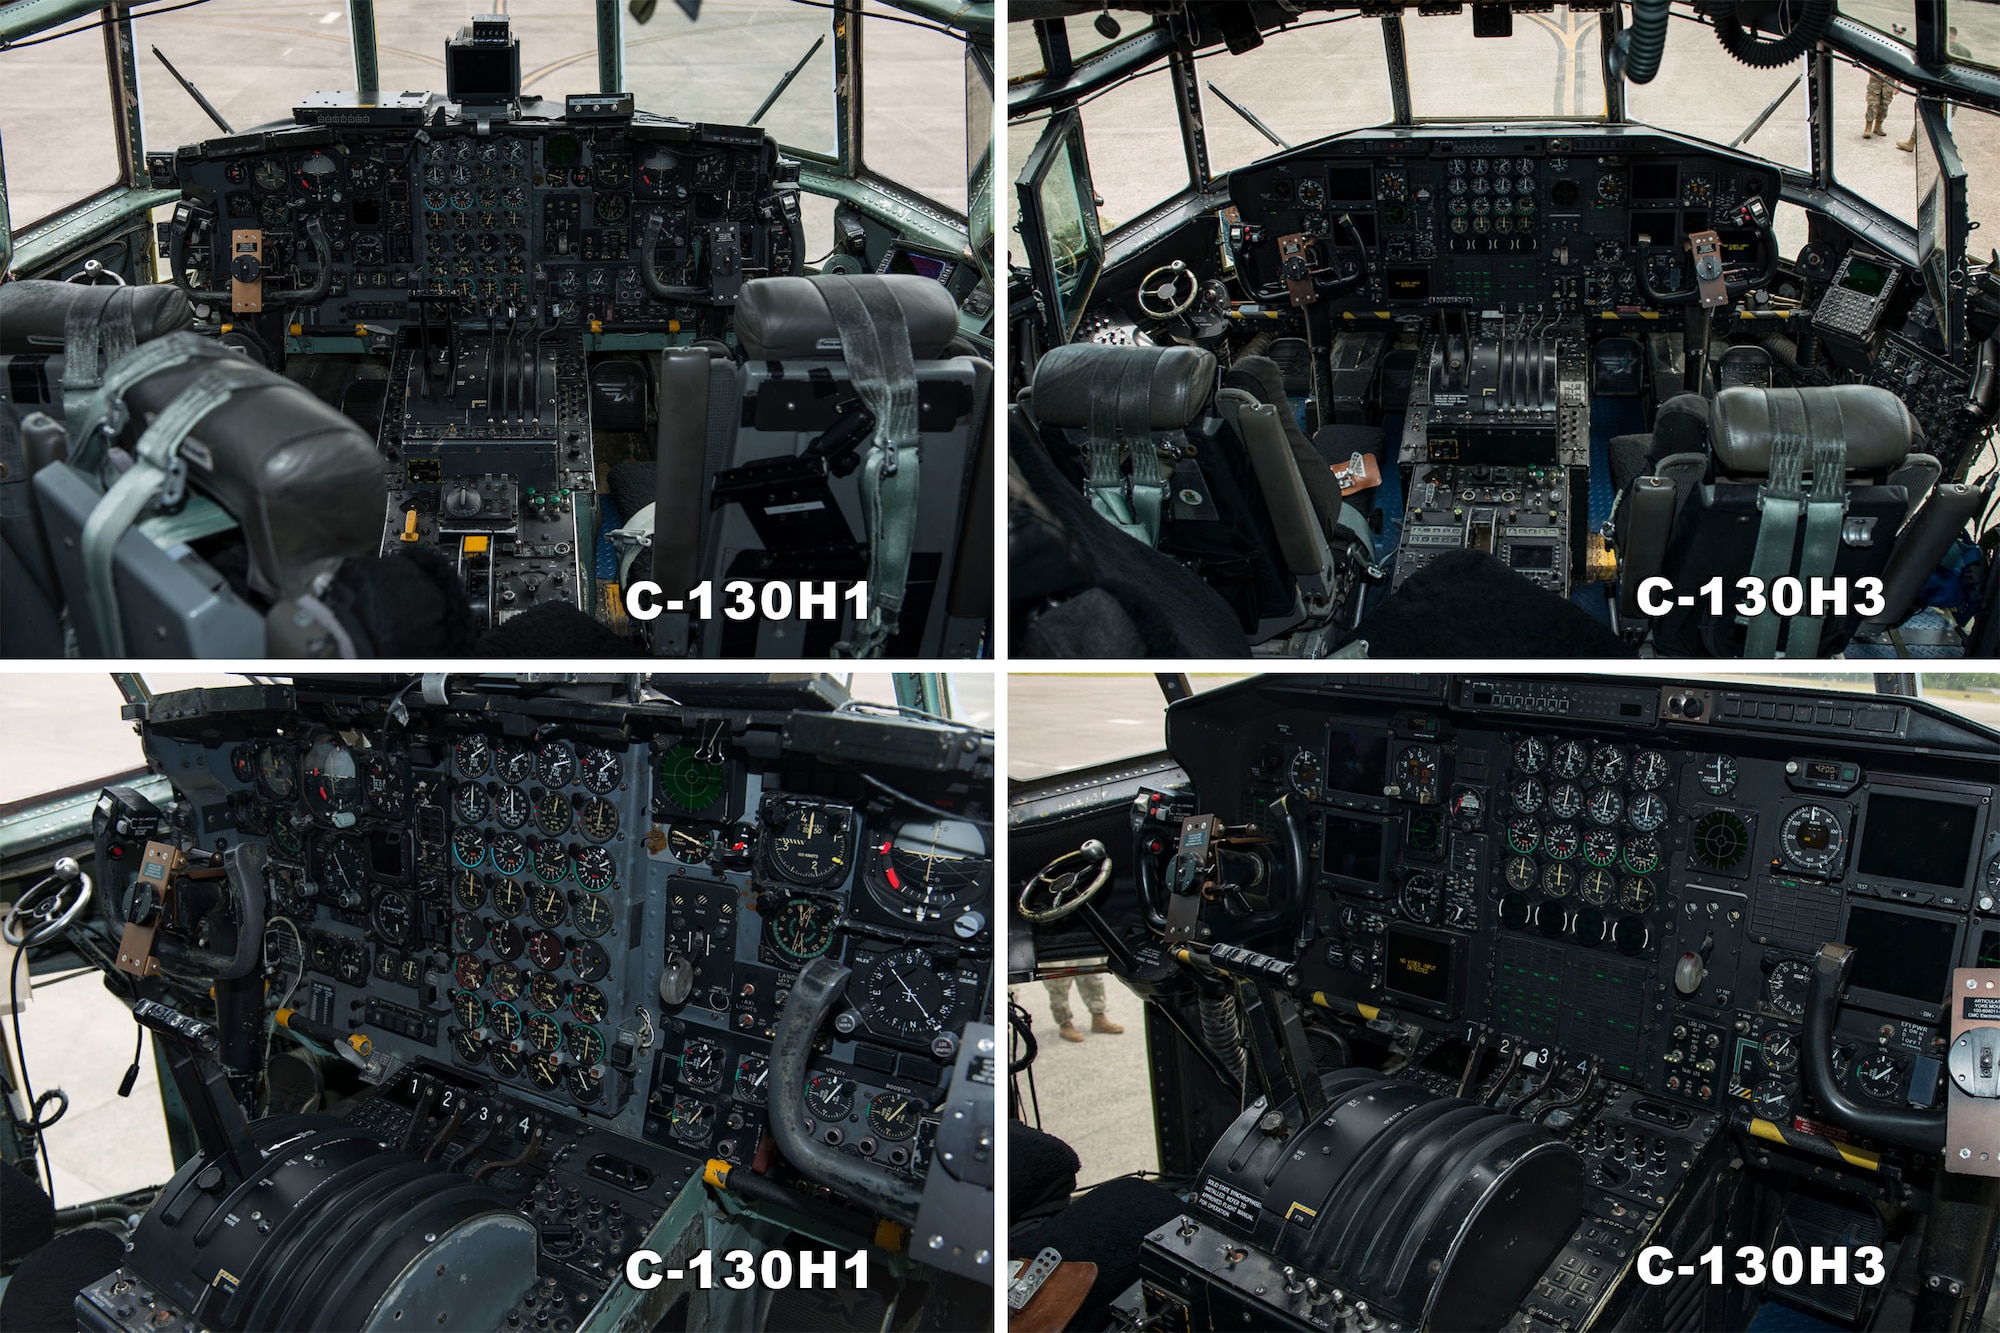 The avionics packages of the C-130H1 and C-130H3 aircraft are displayed, side-by-side, June 2, 2021 at Bradley Air National Guard Base, Connecticut. The Connecticut Air National Guard received H3 model C-130s as part of a plan to upgrade the unit's fleet of aircraft. (U.S. Air National Guard photo by Master Sgt. Tamara R. Dabney)